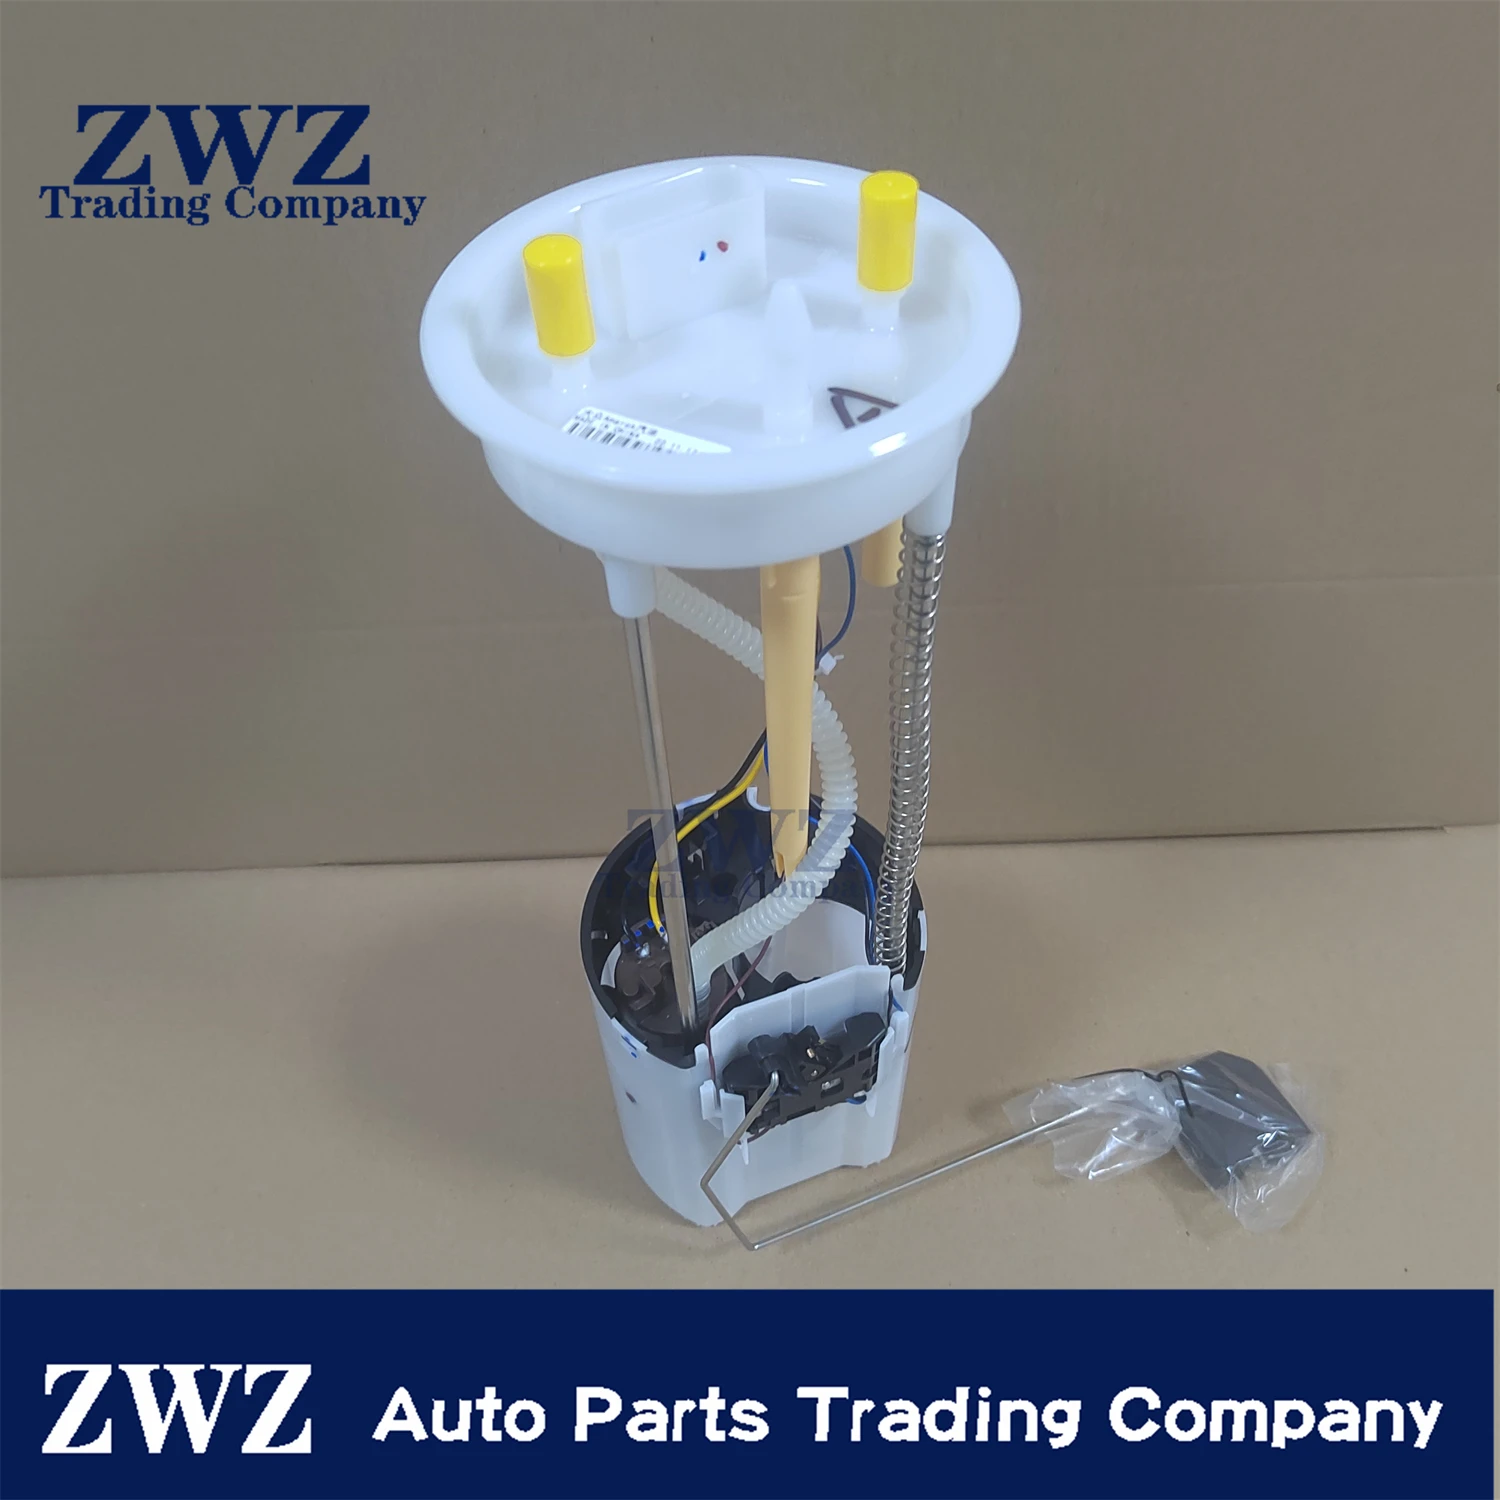 

New Arrival Fuel Pump Module Assembly In Tank Fits For Volkswagen Amarok 2H0919051A 2H0919051D 2H0 919 051 A Gasolina